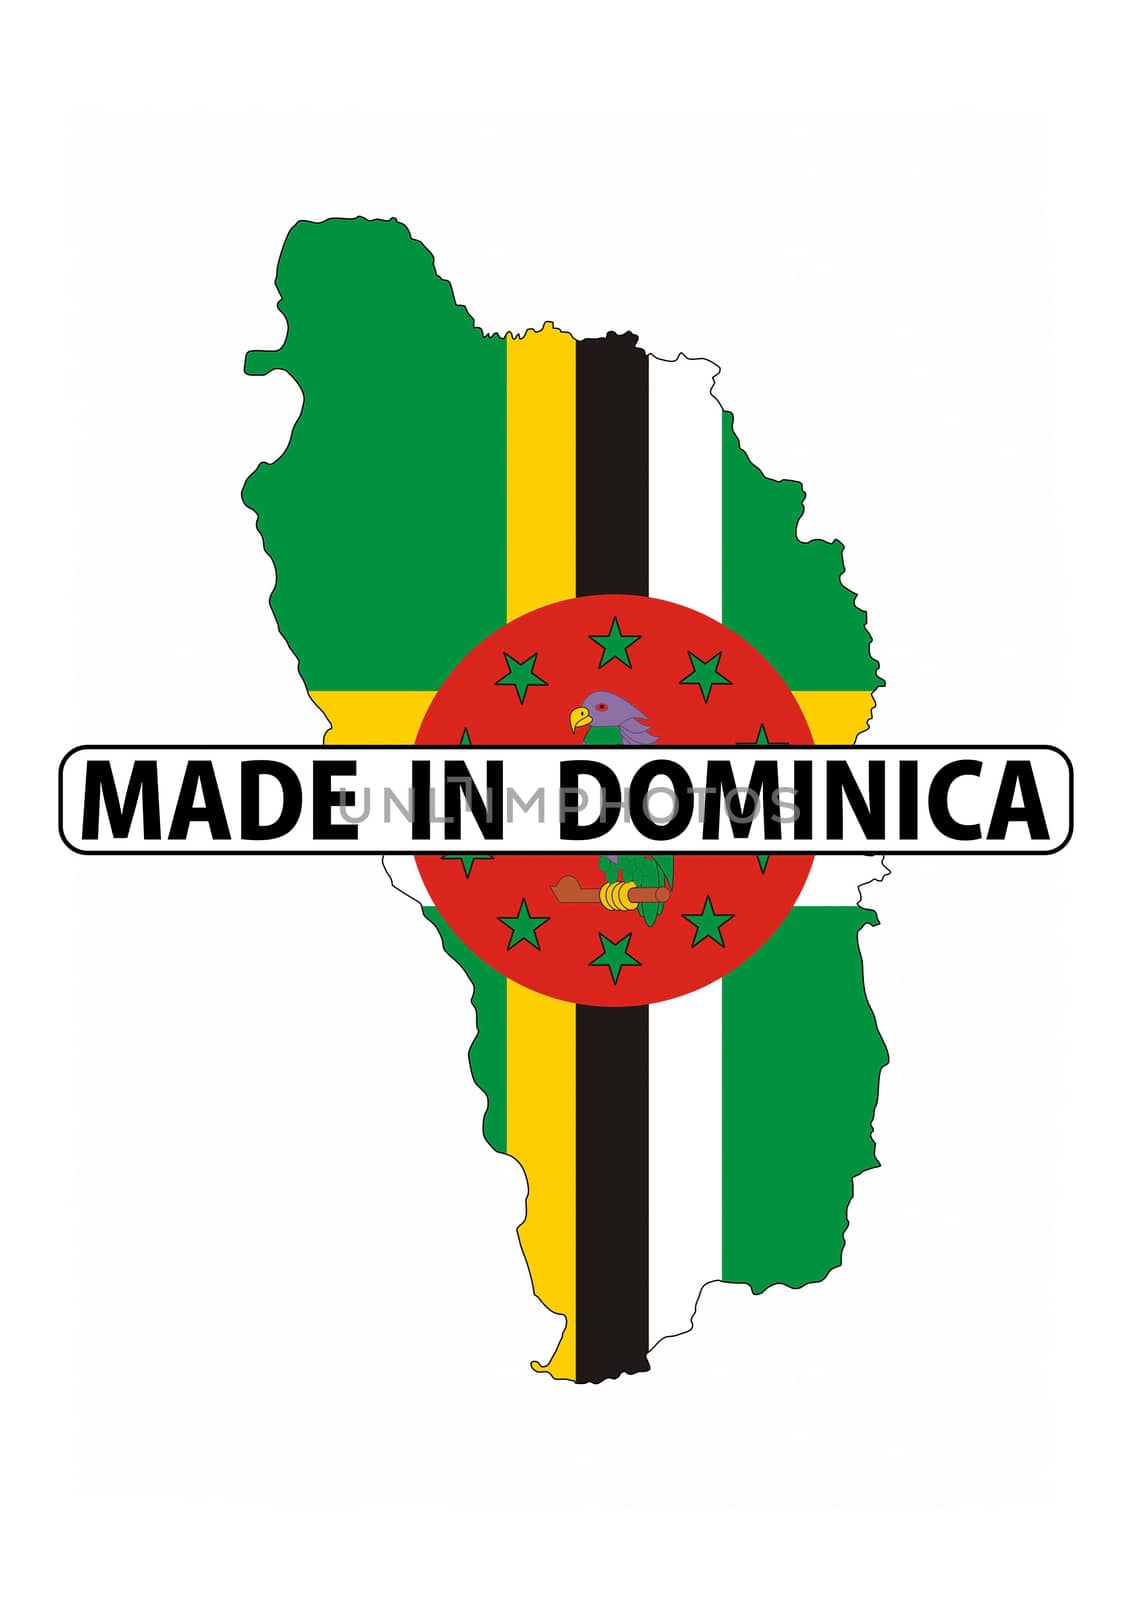 made in dominica country national flag map shape with text